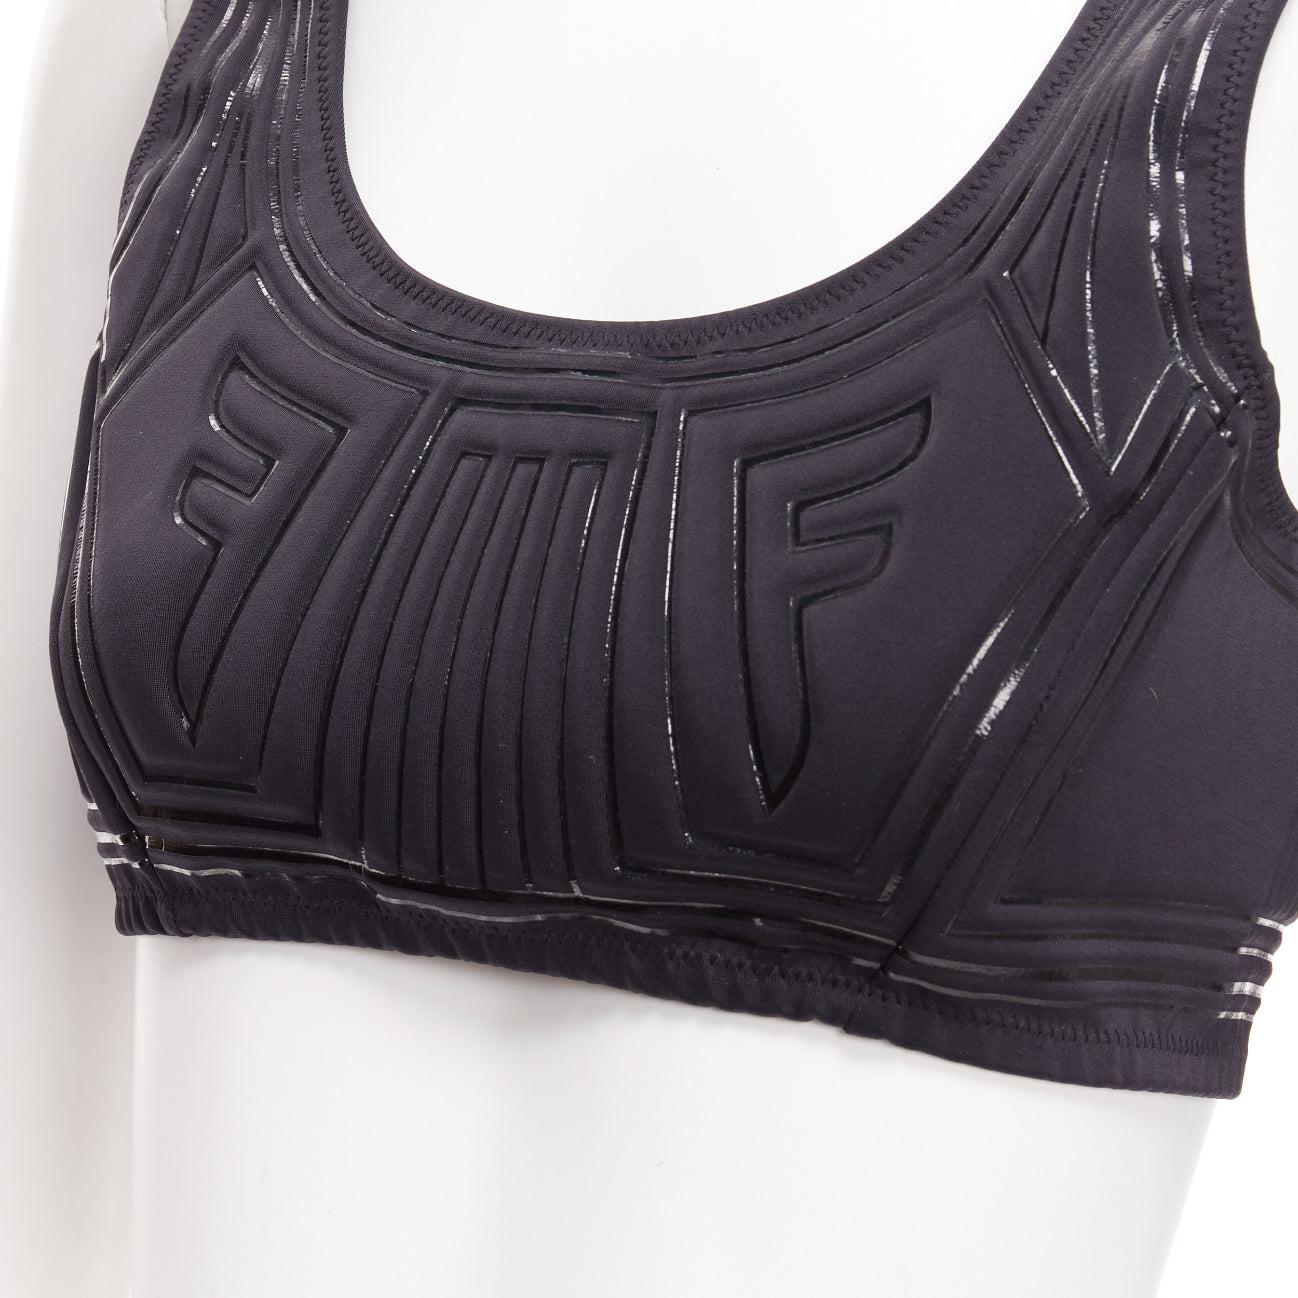 FENDI 2019 FFreedom black neoprene rubber FF logo scoop cropped bra top IT40 S
Reference: CNPG/A00051
Brand: Fendi
Collection: SS 2019 Ffreedom
Material: Polyamide, Blend
Color: Black
Pattern: Geometric
Closure: Hook & Bar
Lining: Black Fabric
Made